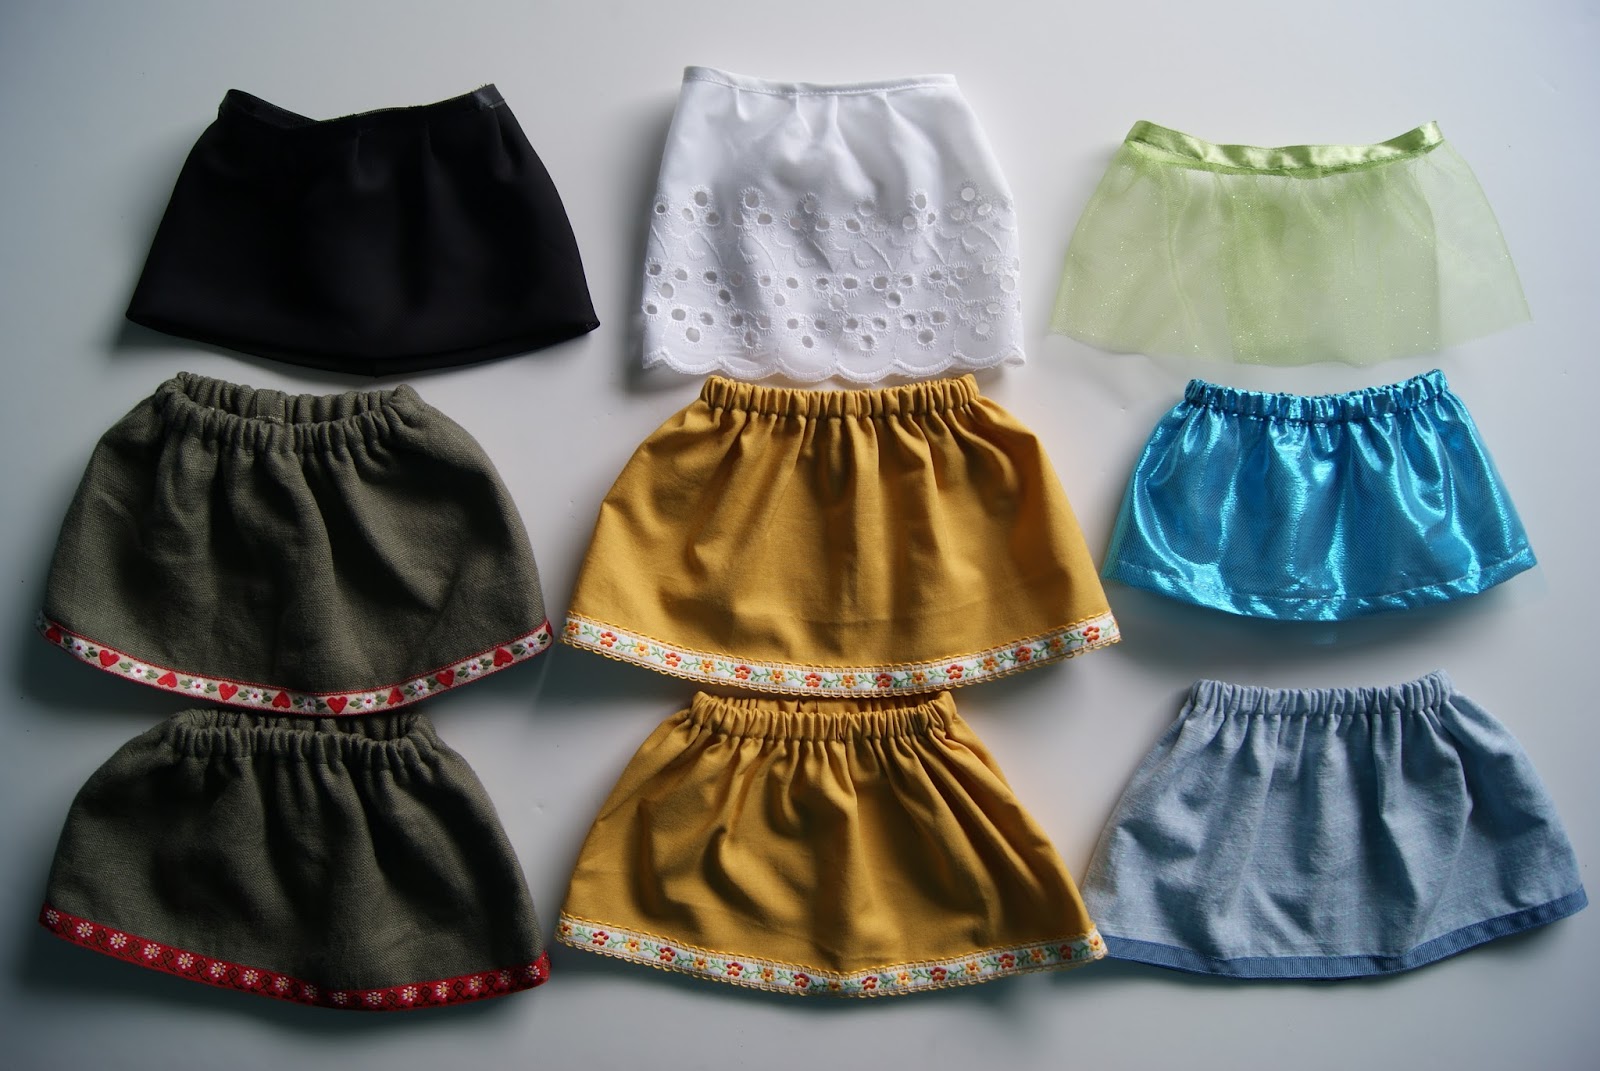 18-inch doll skirts giveaway at nest full of eggs